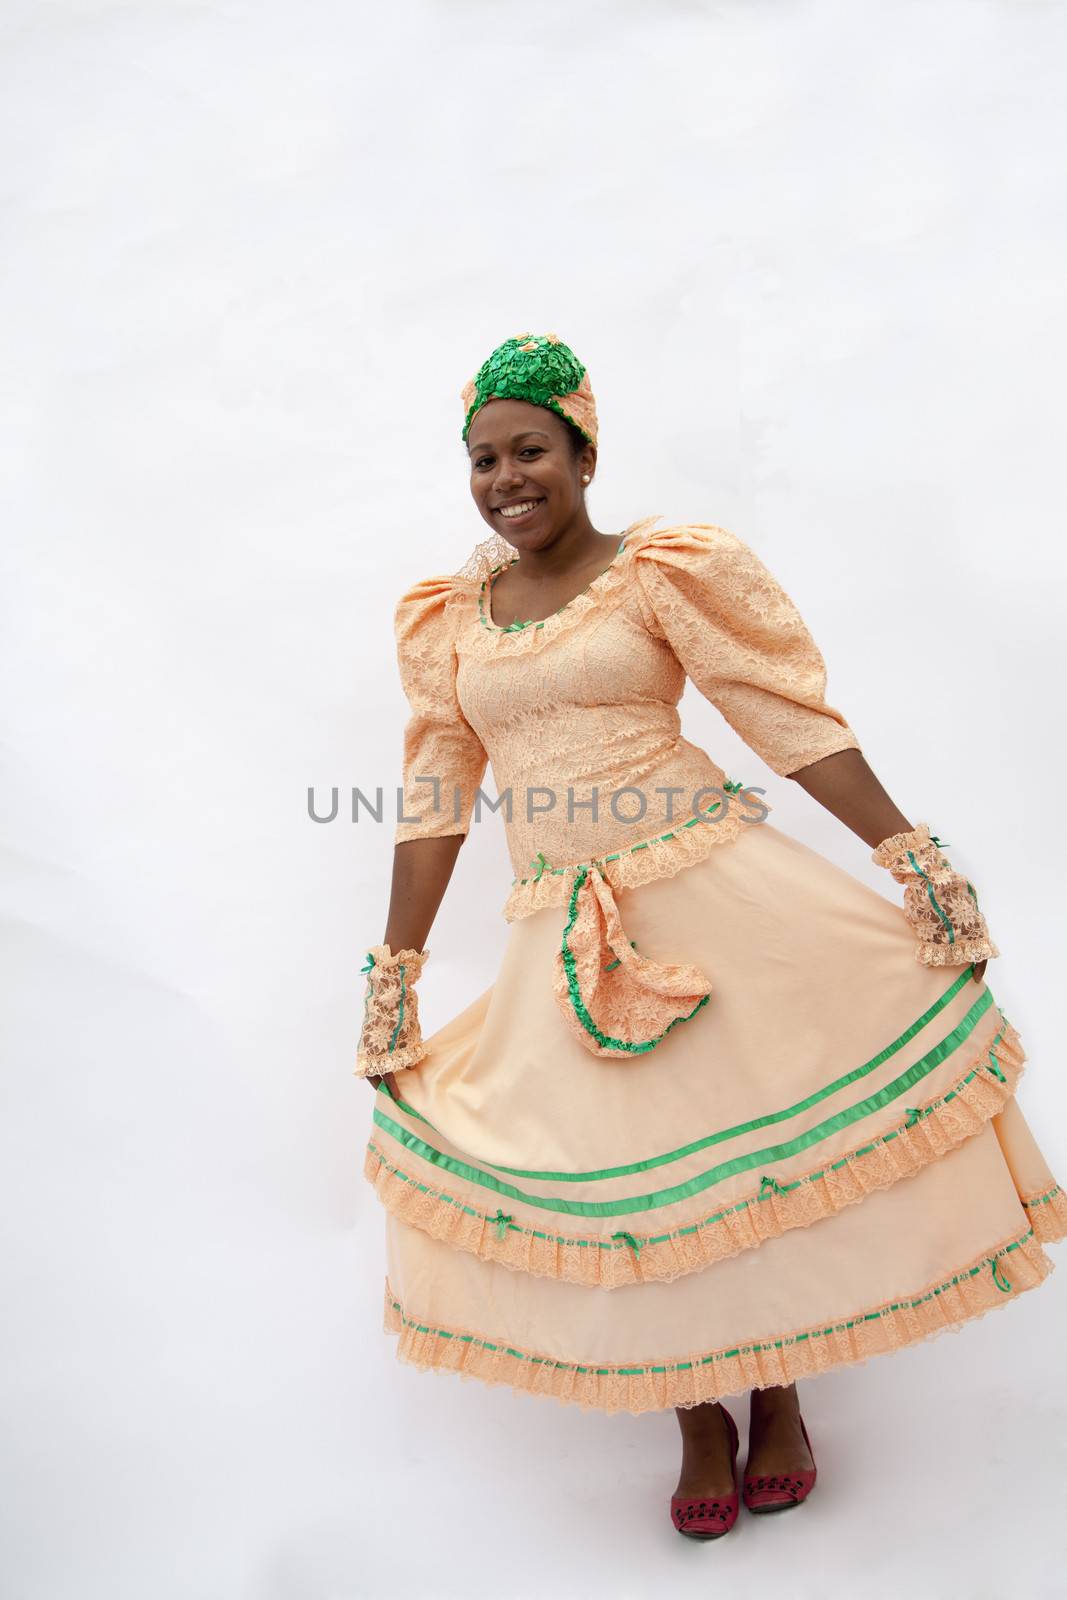 Portrait of young smiling woman holding her skirt in traditional clothing from the Caribbean, studio shot